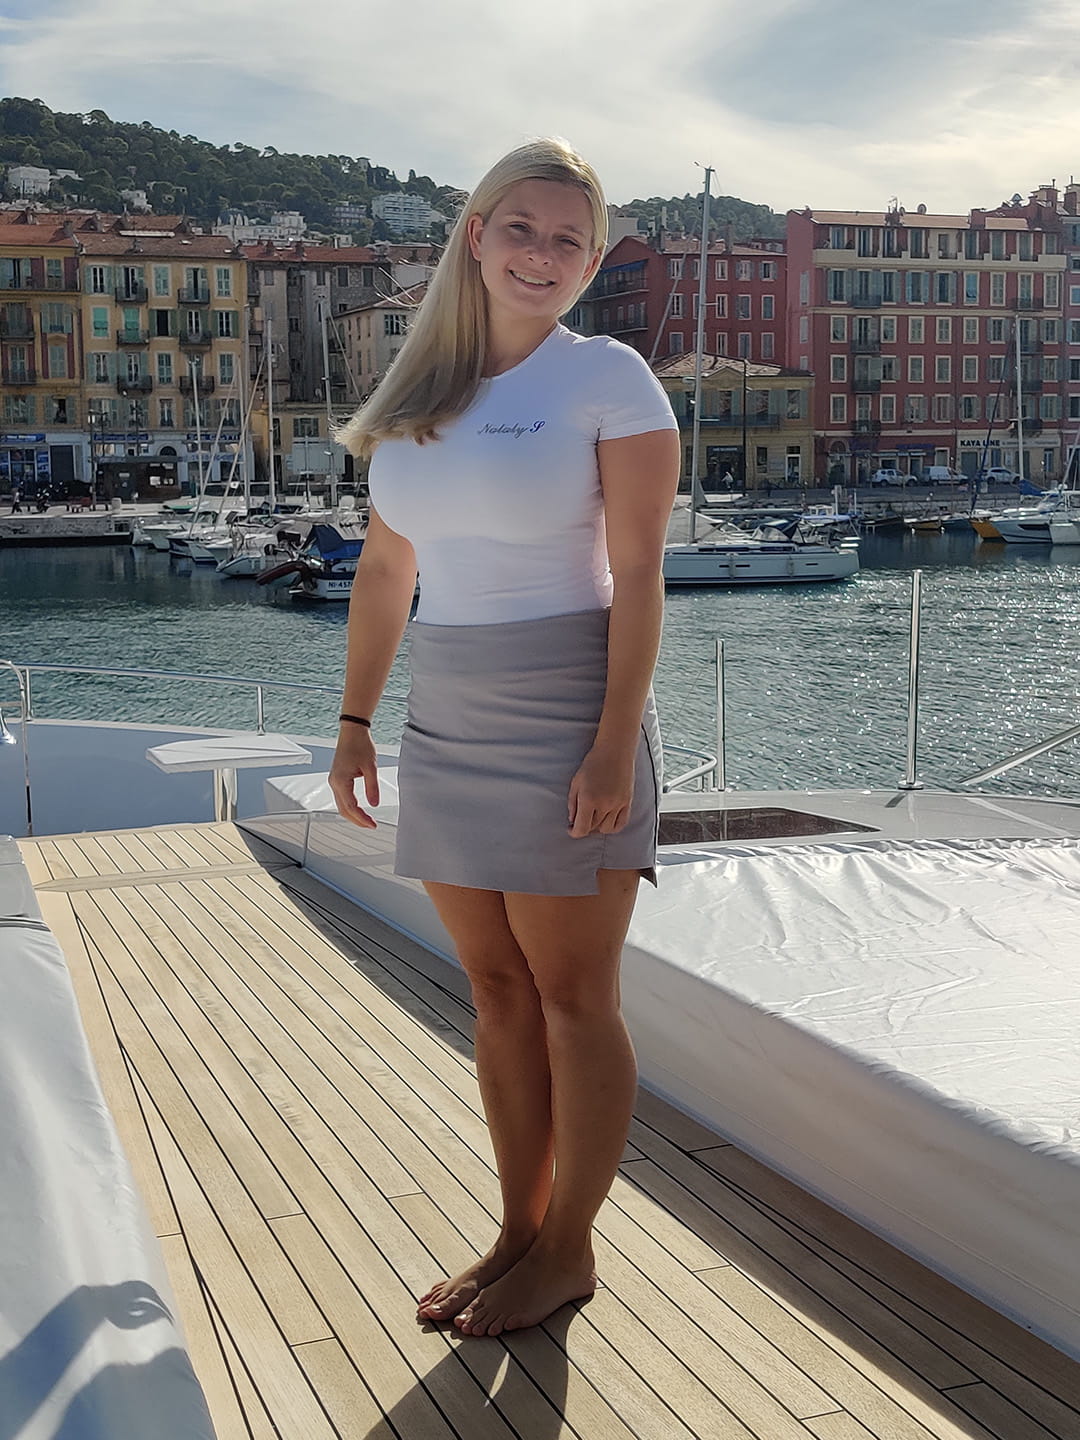 Emily standing on the yacht that she works on.